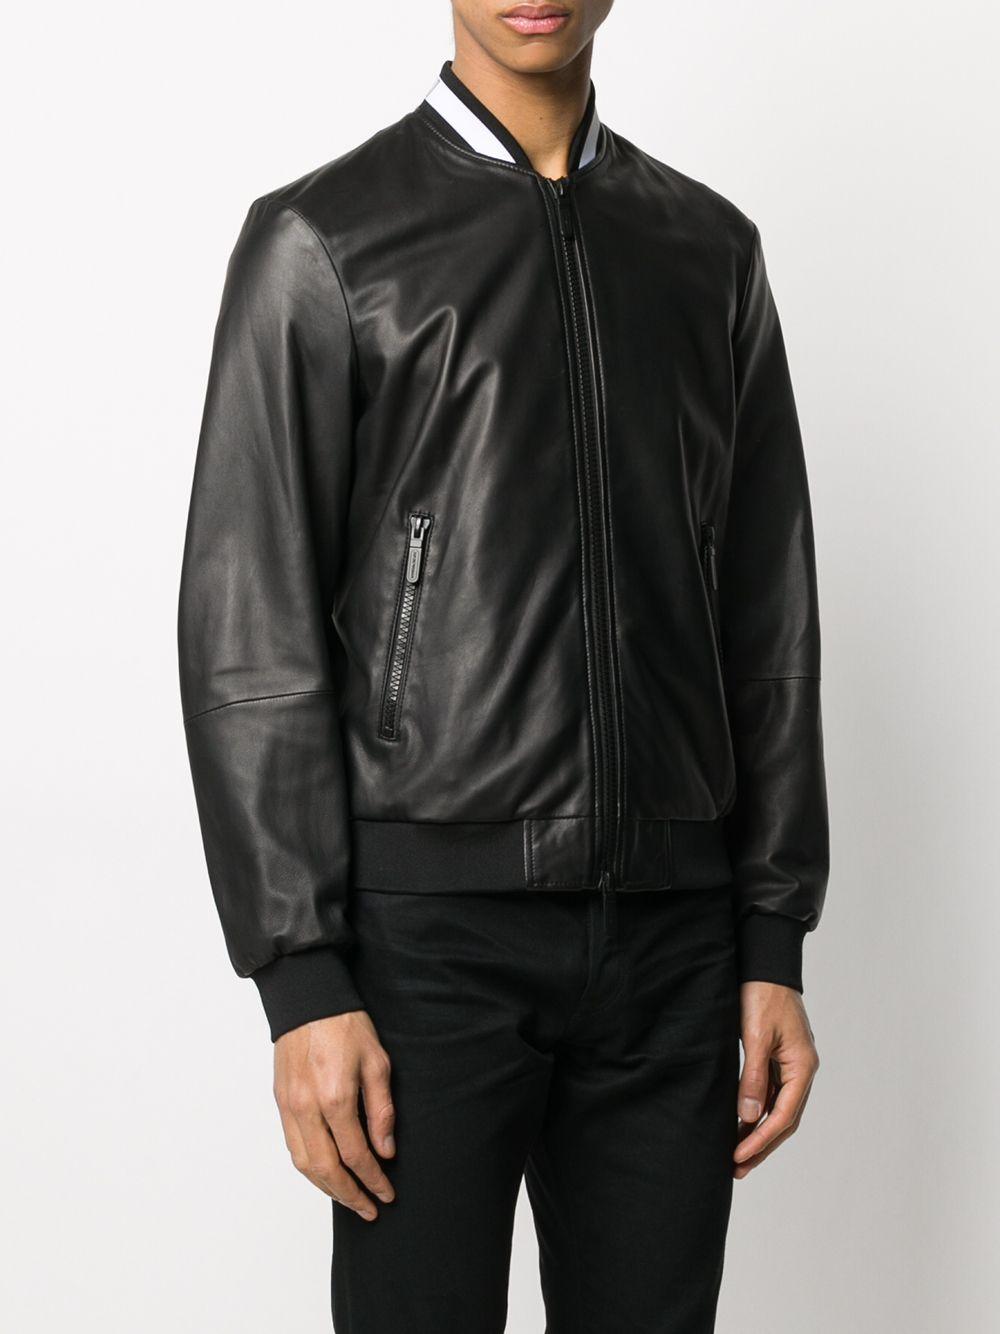 Emporio Armani Leather Bomber Jacket in Black for Men | Lyst